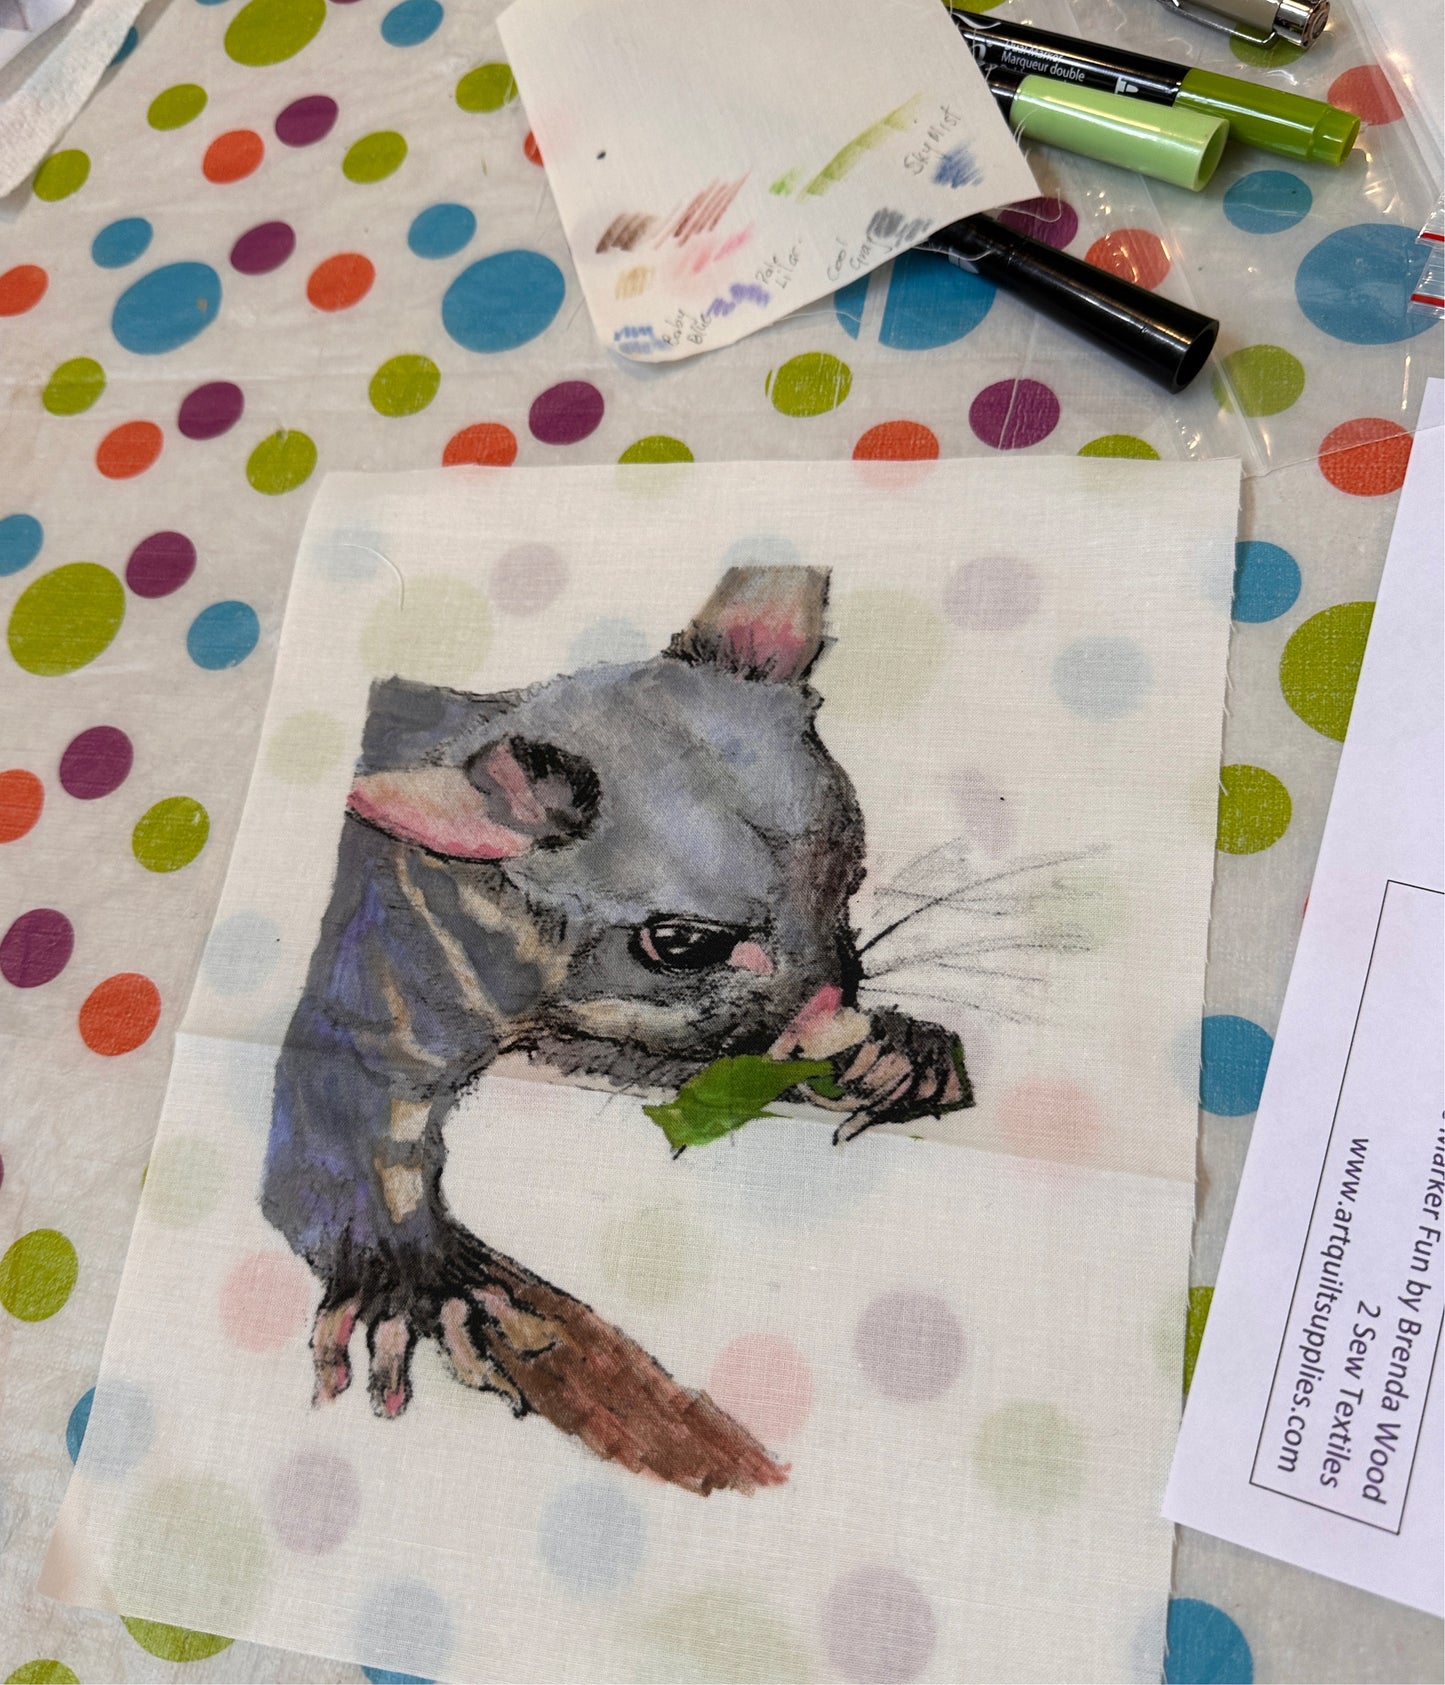 Possum drawing - Fabric art set as seen at craftalive from 2 sew textiles art quilt supplies